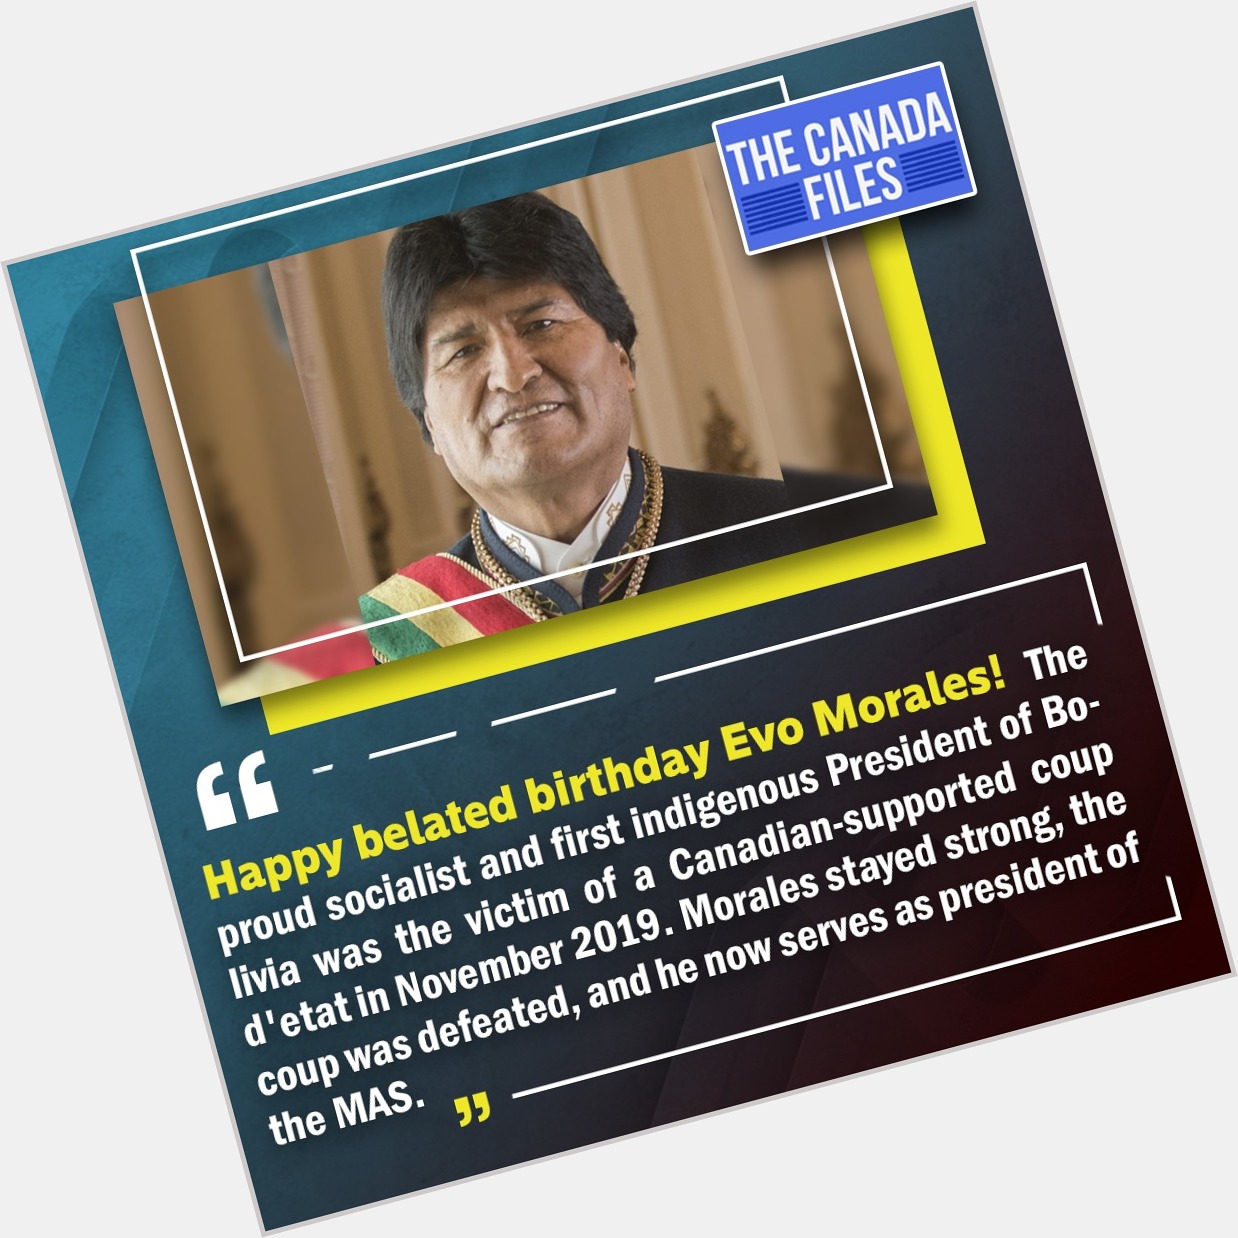 Happy belated 62nd birthday to socialist, indigenous former Bolivian President Evo Morales! 